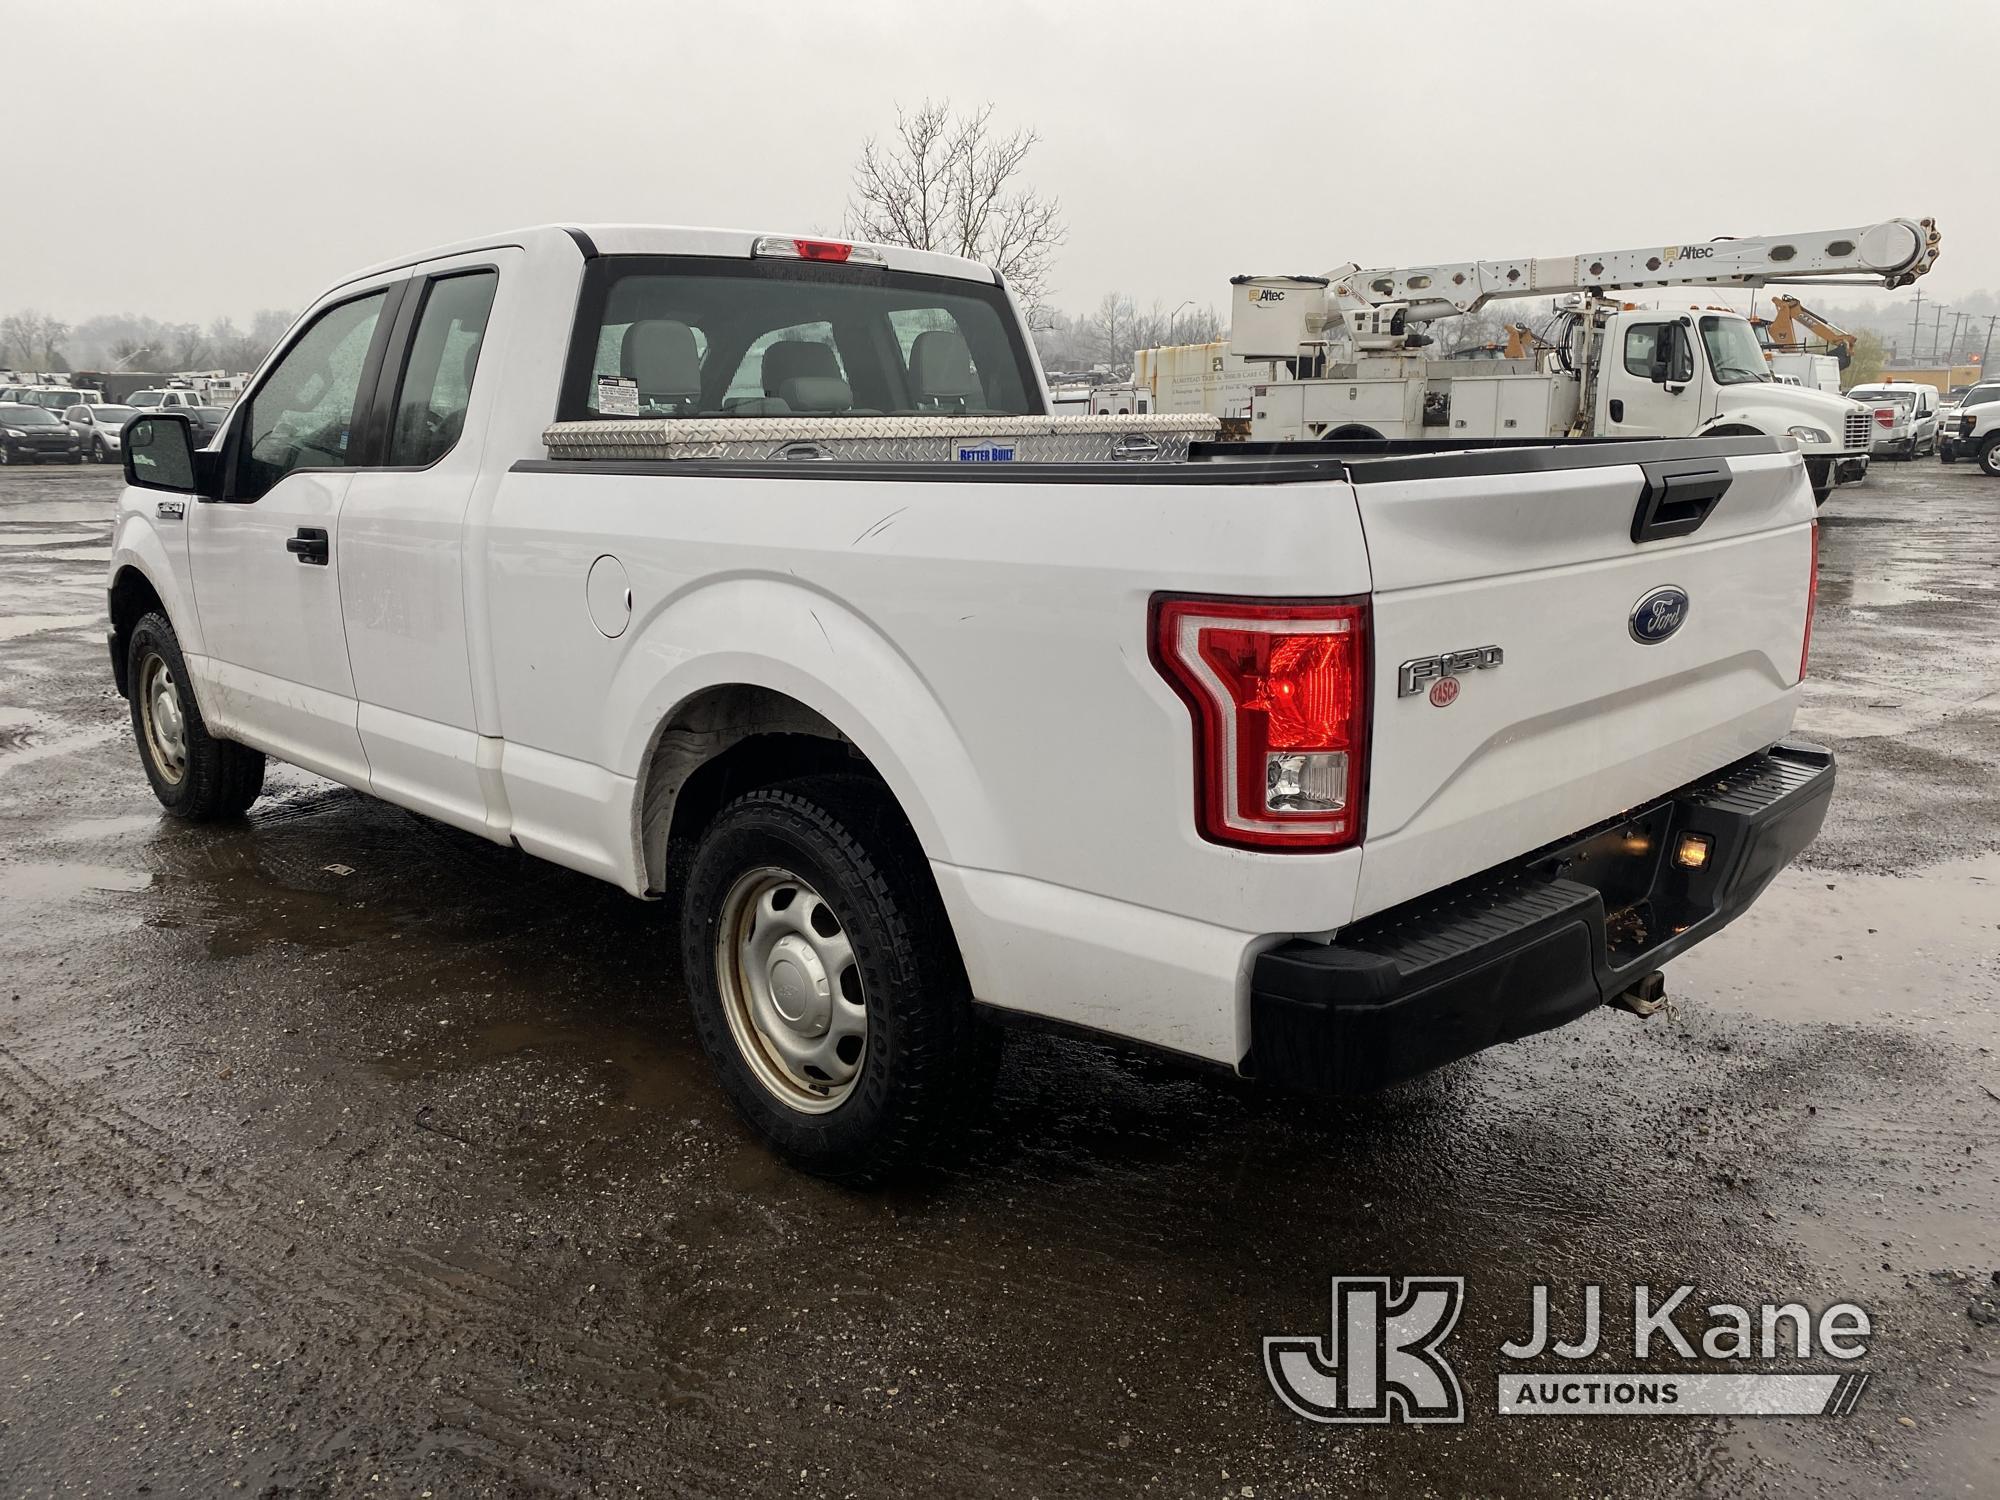 (Plymouth Meeting, PA) 2017 Ford F150 Extended-Cab Pickup Truck Runs & Moves, Body & Rust Damage